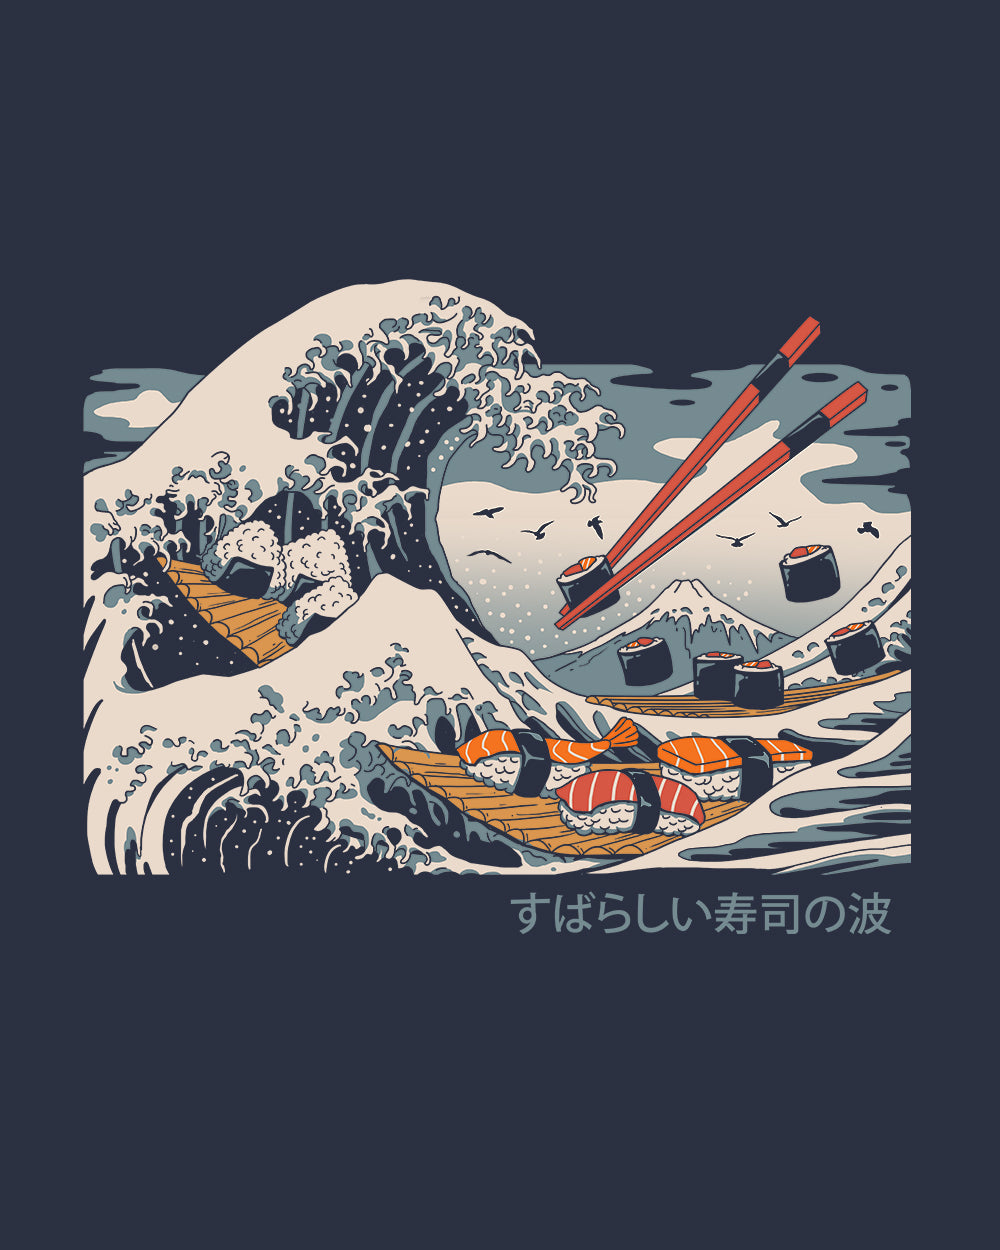 The Great Sushi Wave Hoodie Australia Online #colour_navy